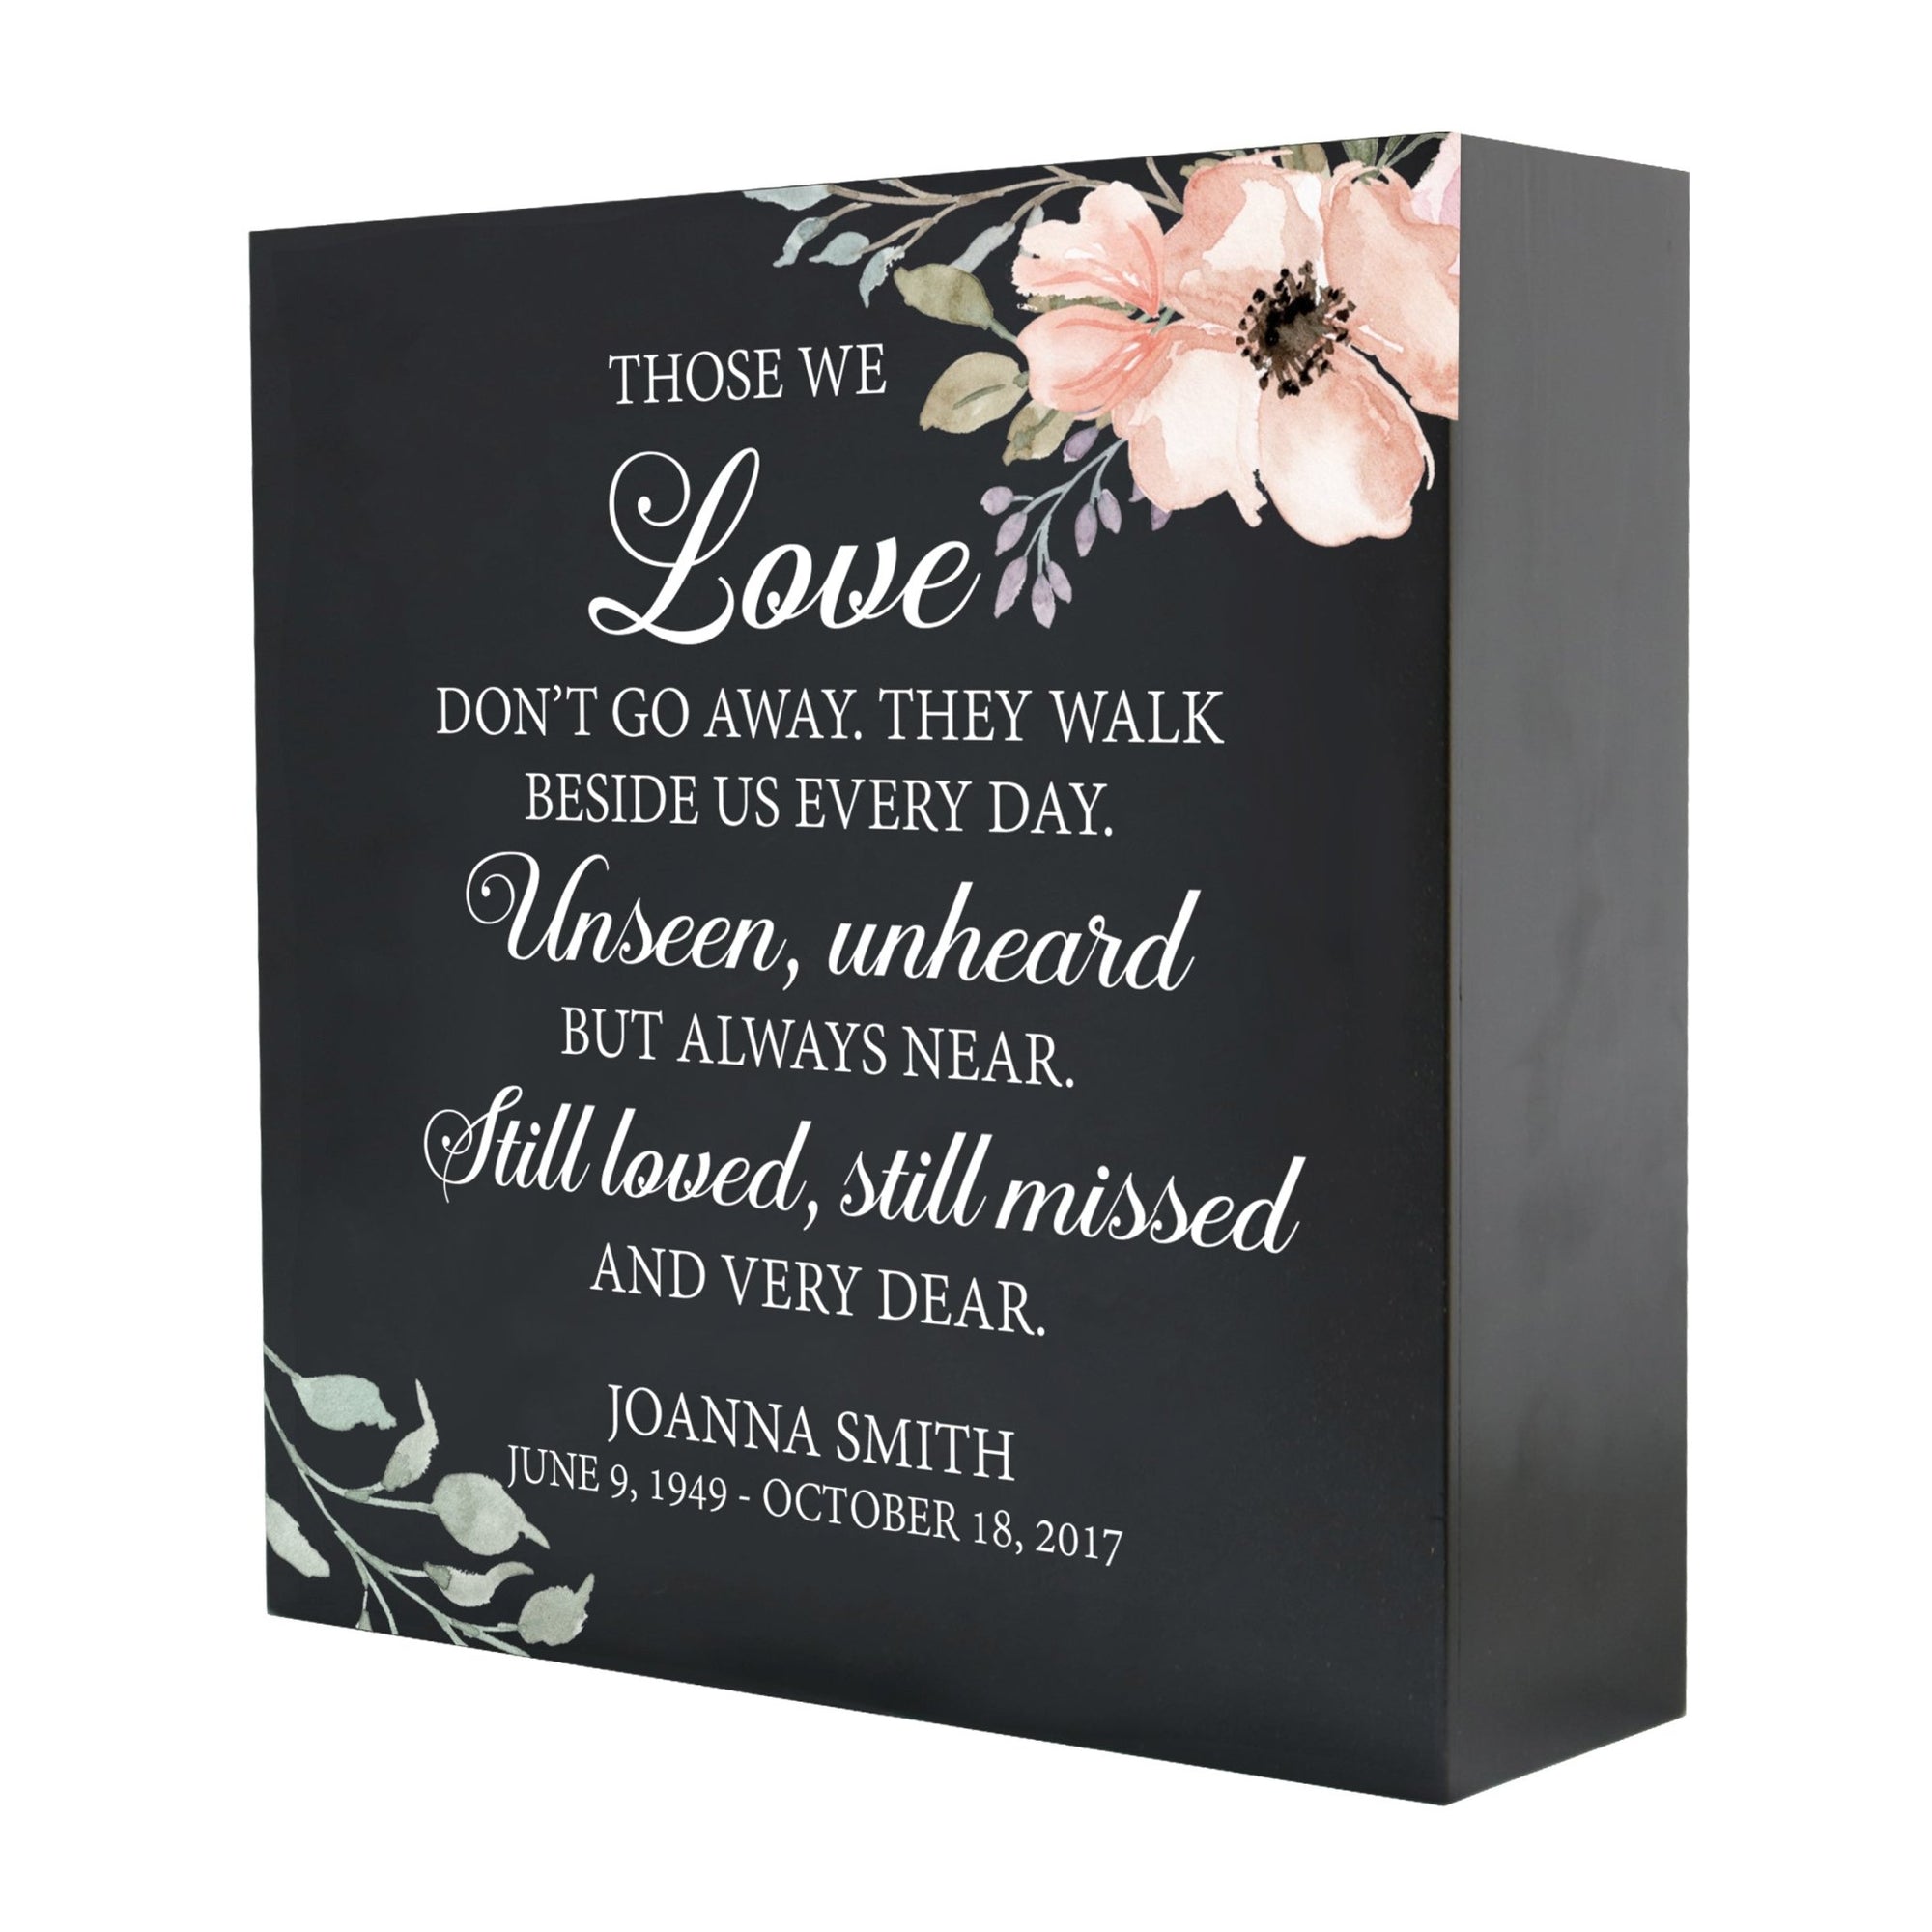 Personalized Modern Inspirational Memorial Wooden Shadow Box and Urn 10x10 holds 189 cu in of Human Ashes - Those We Love Don’t Go (Black) - LifeSong Milestones